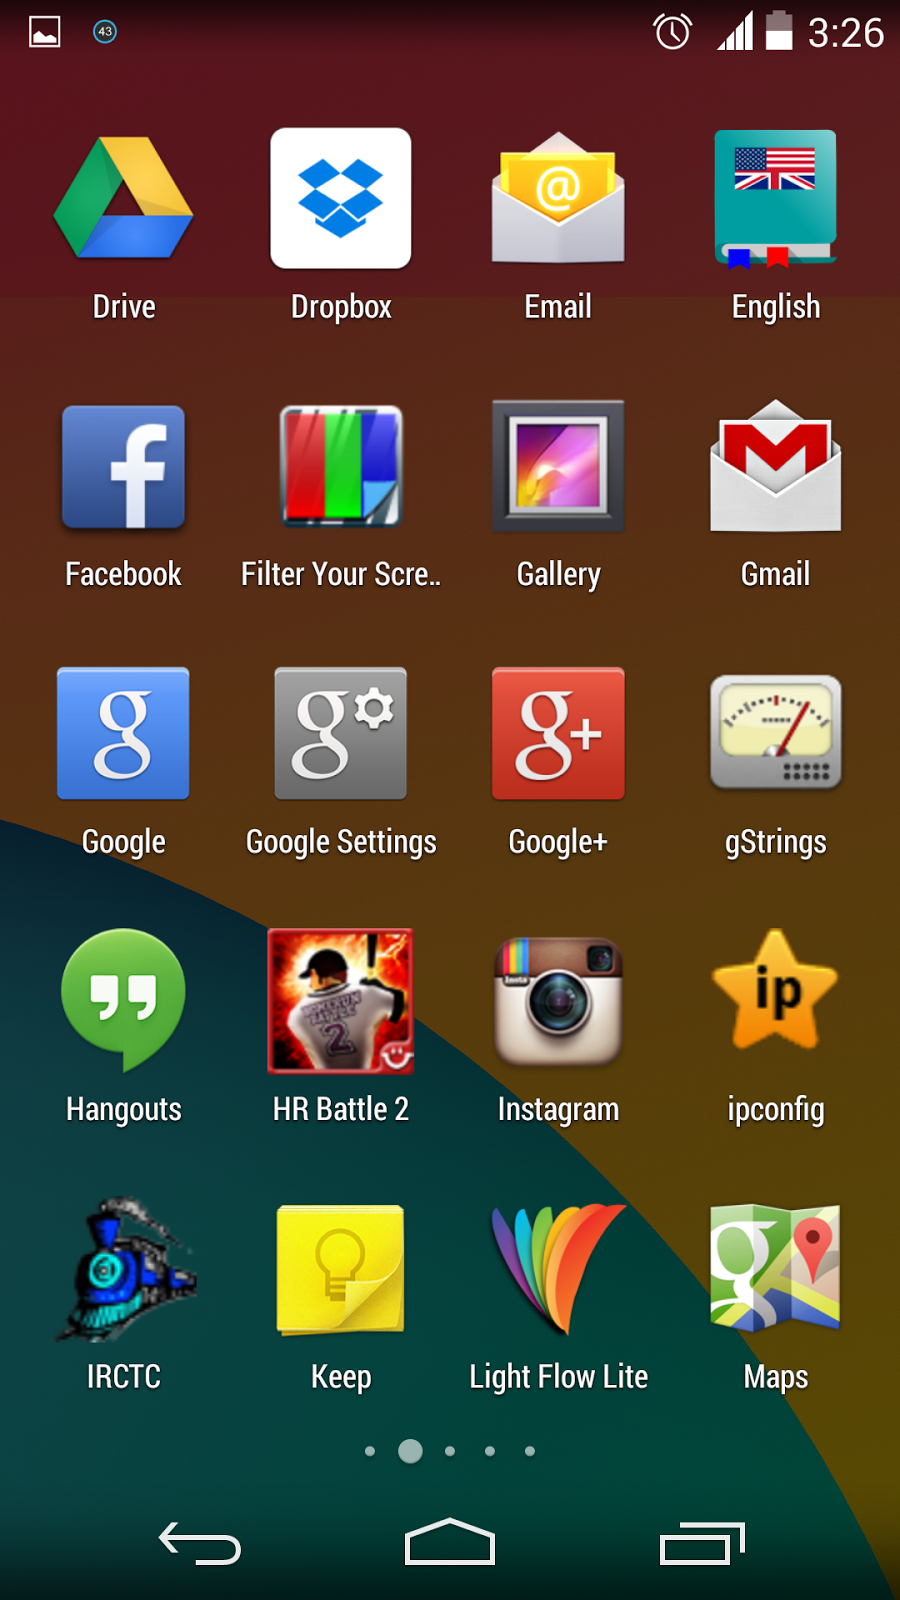 Google+LG+Nexus+5+Android+KitKat+Review+Handson+Detailed+Benchmark++%252816%2529.png